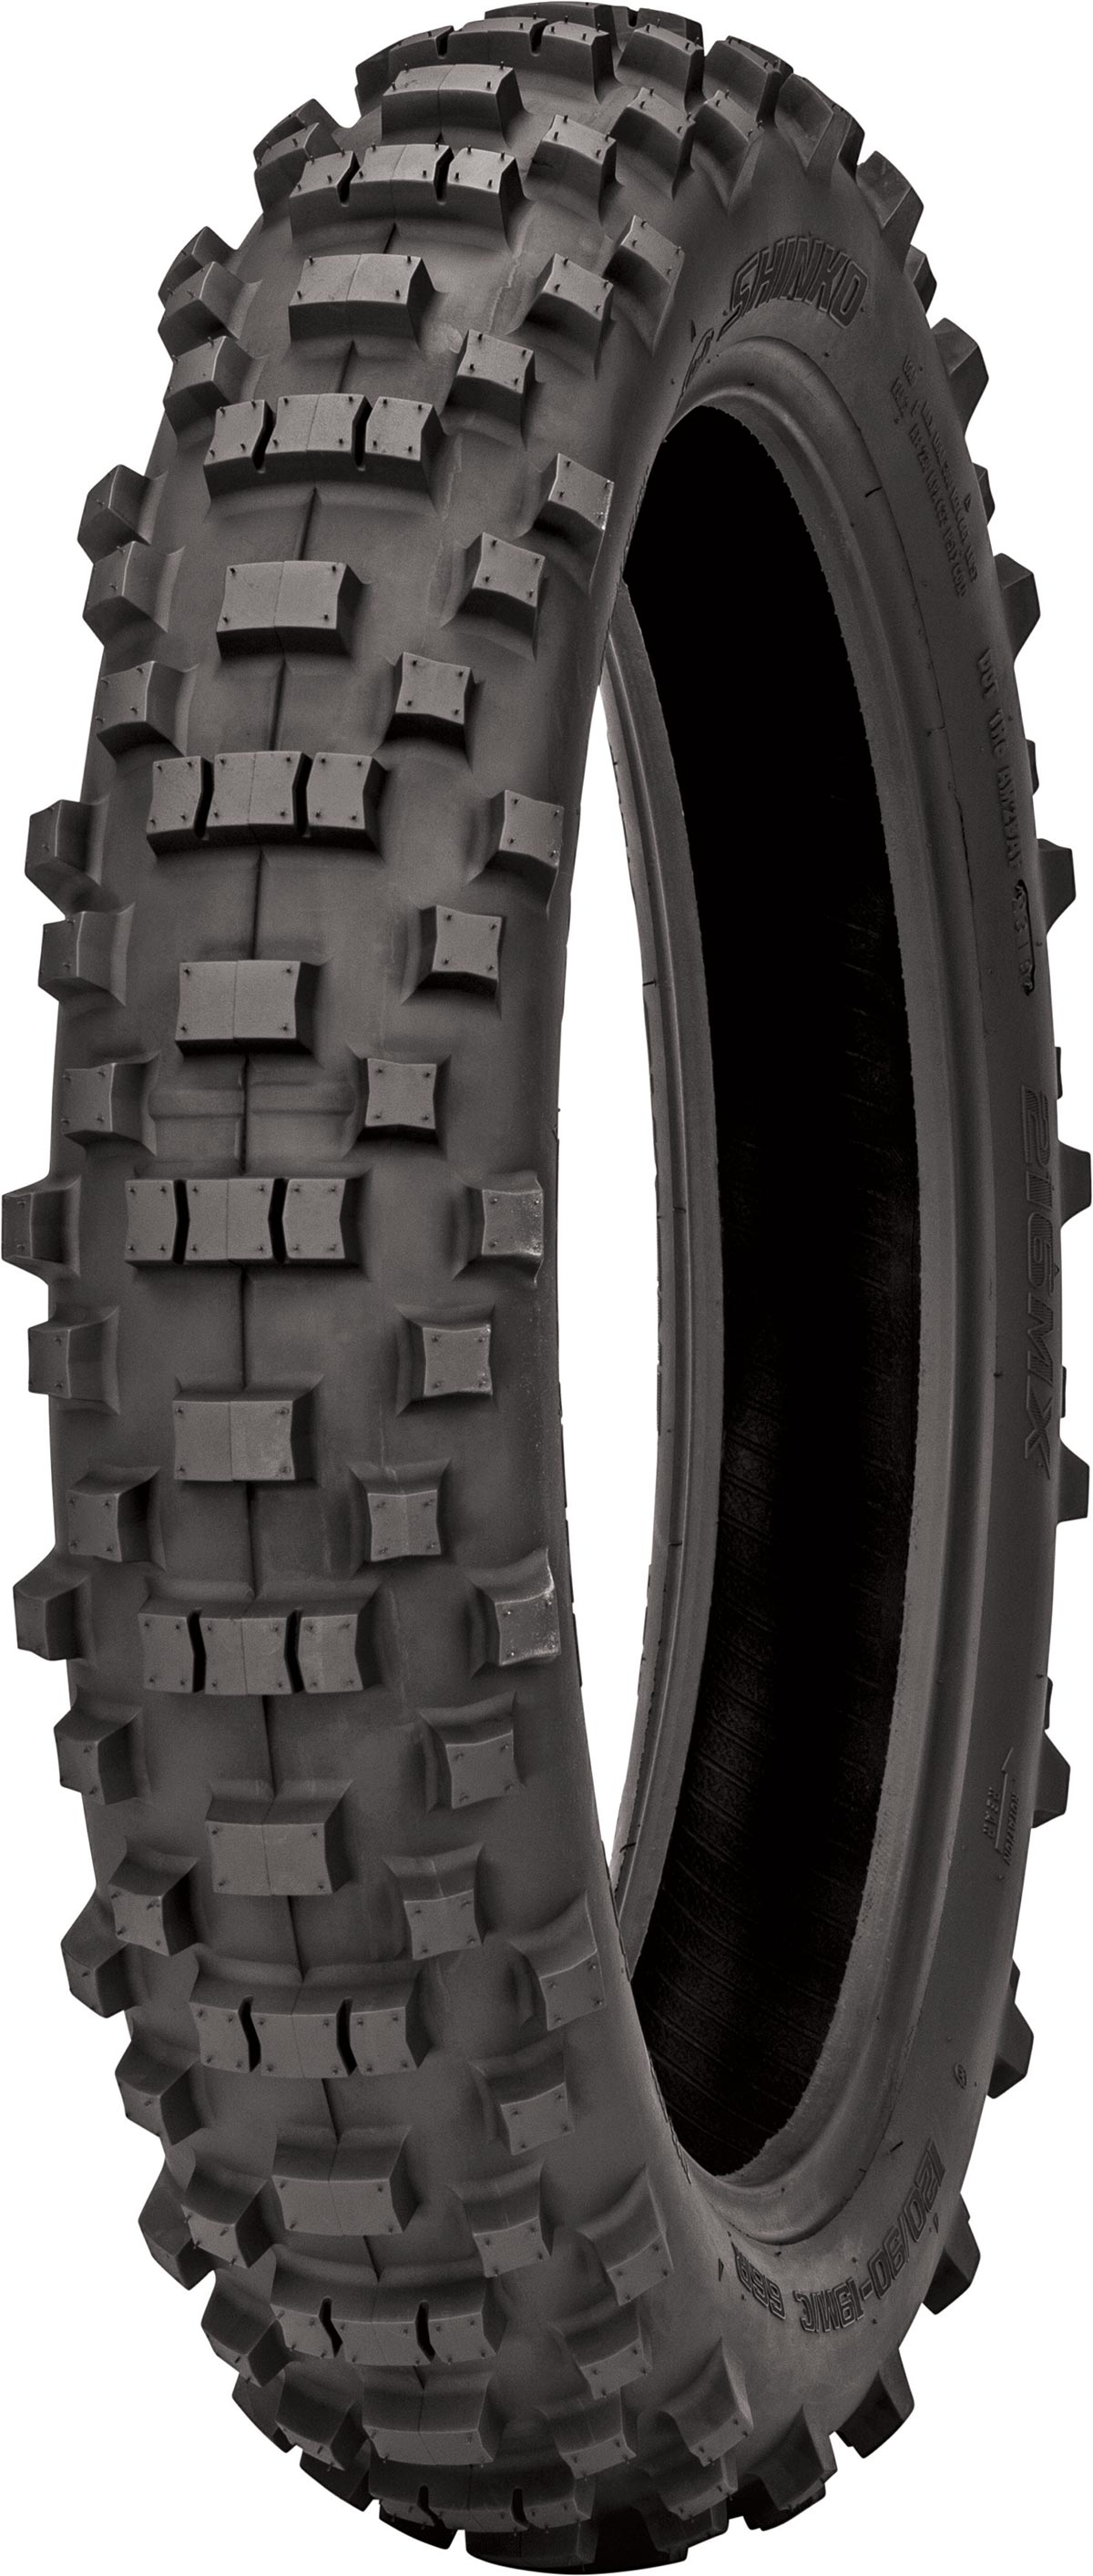 ProTrax Motocross Offroad Front 80/100-21" & Rear 110/100-18 Tire & Tubes Combo